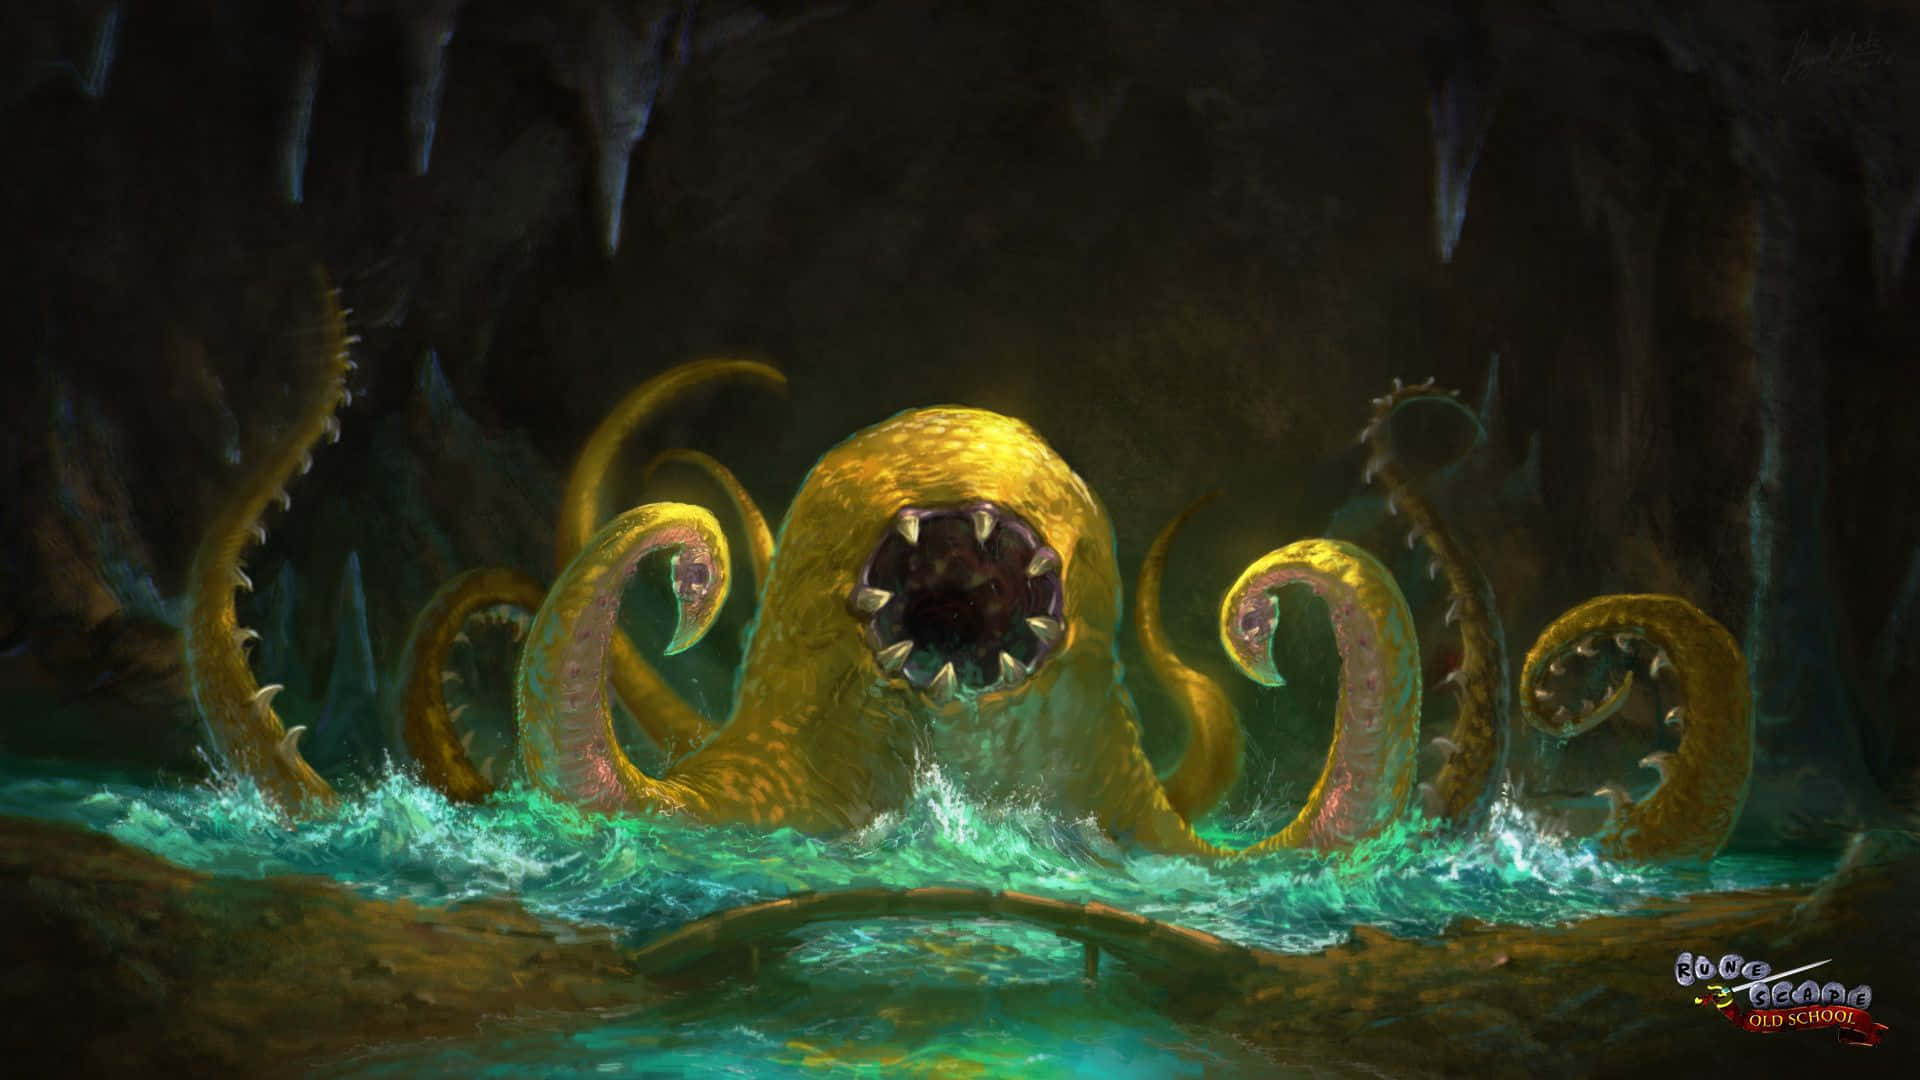 A Painting Of An Octopus In The Water